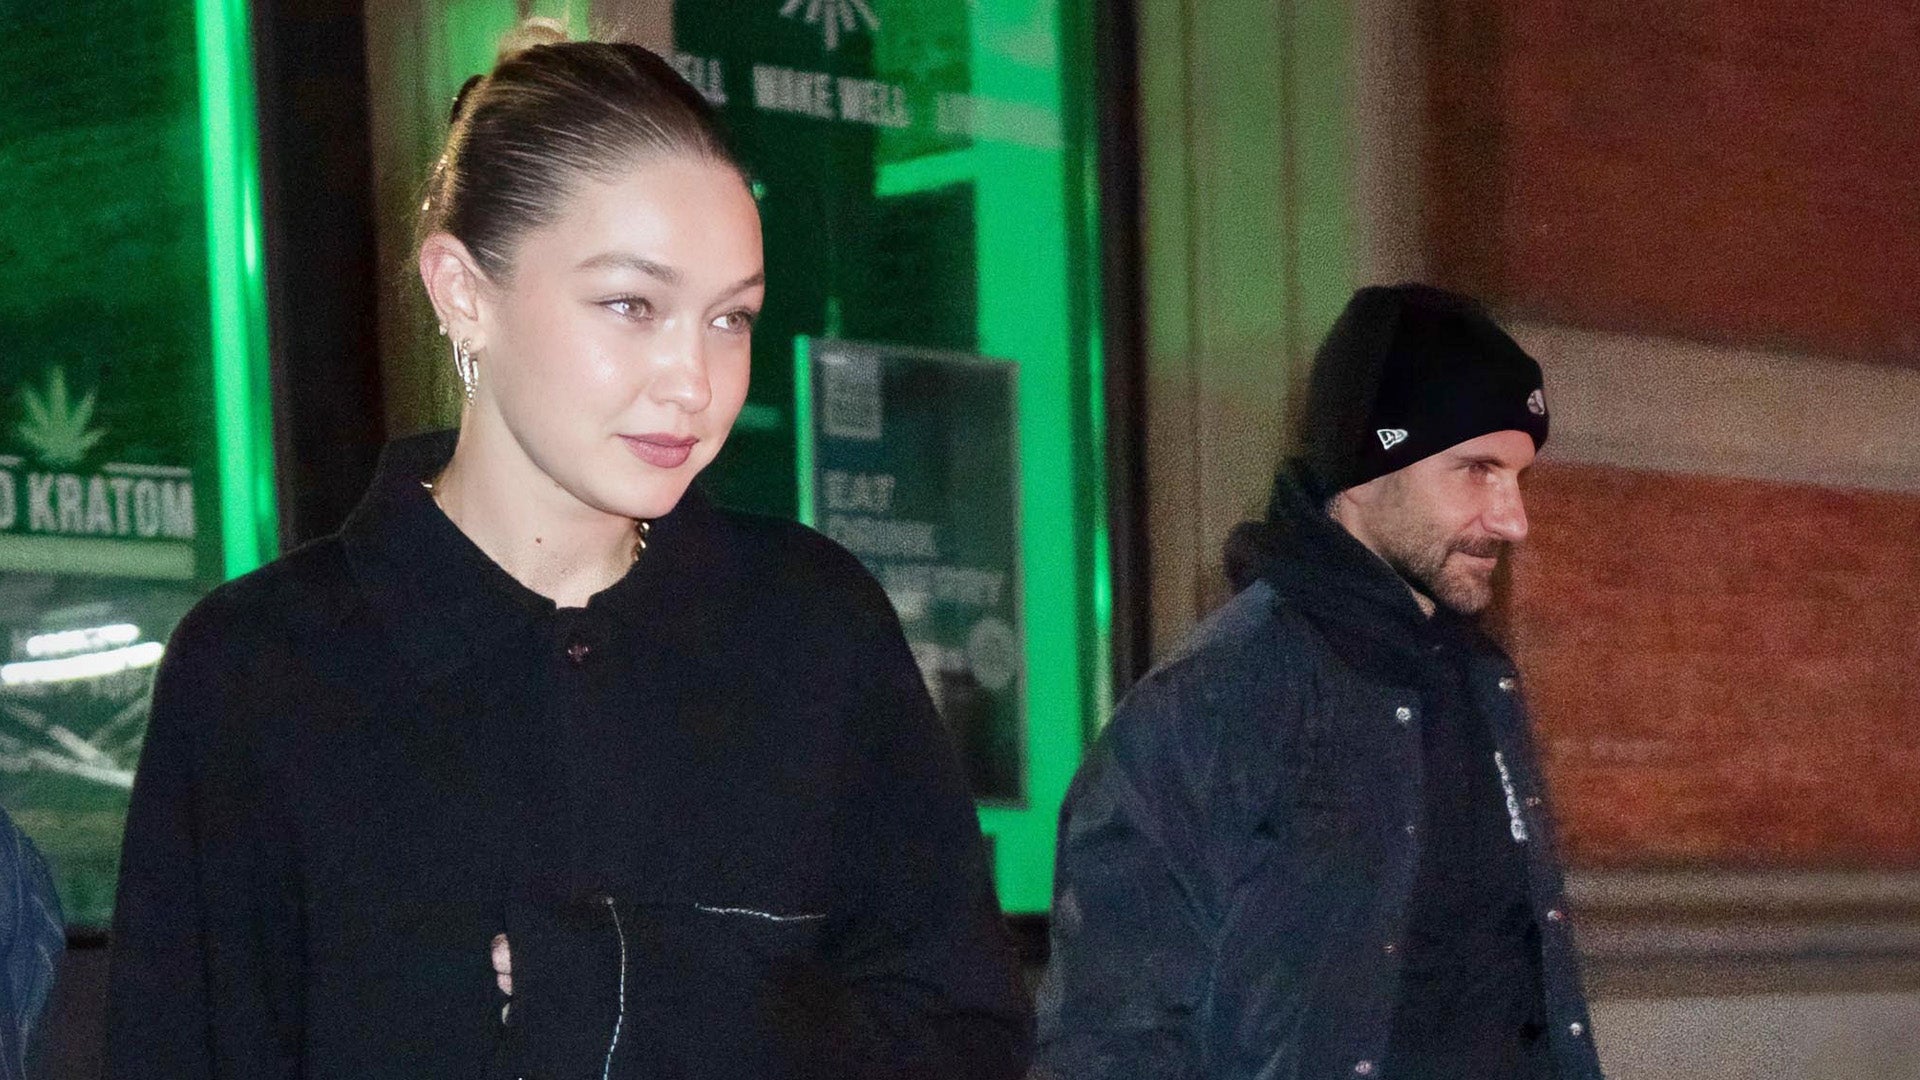 Gigi Hadid and Bradley Cooper seen wearing the same Guest in Residence x  Adidas shoes on separate occasions, seemingly confirming their relationship